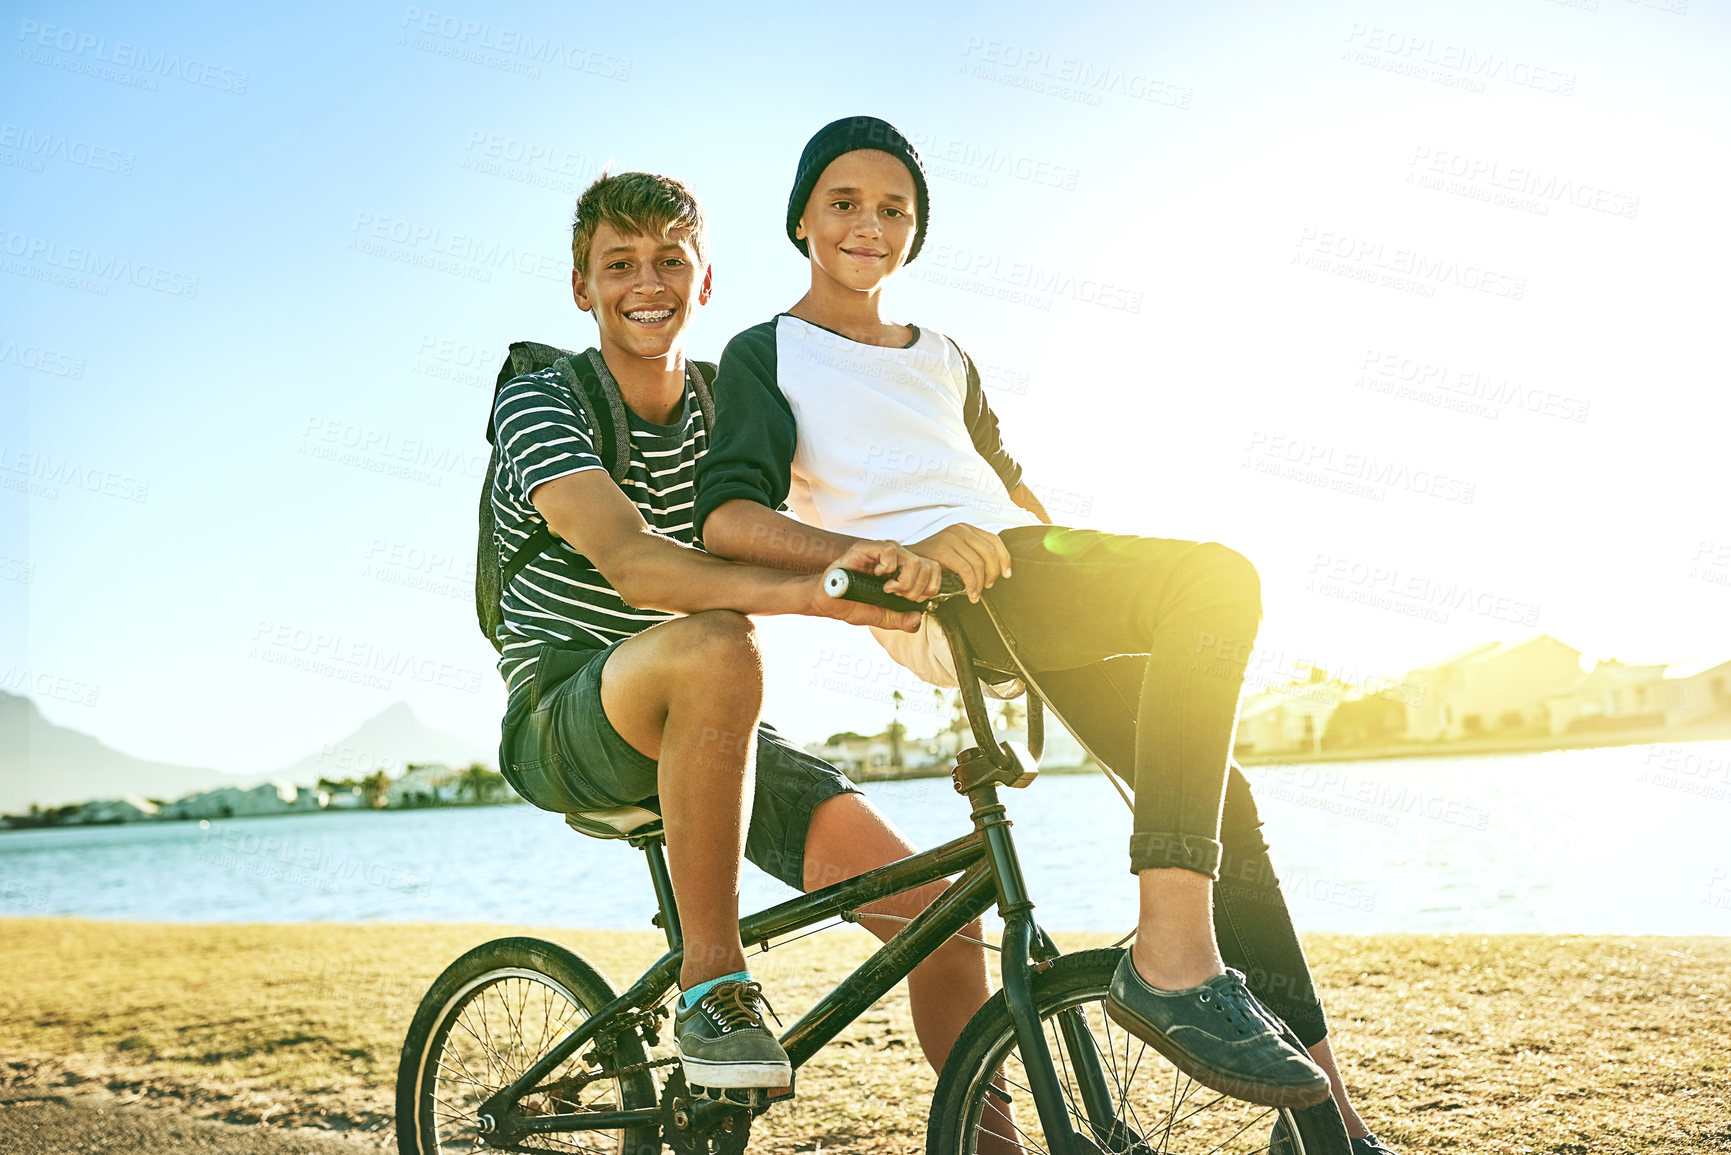 Buy stock photo Cropped portrait of a young boy giving his younger brother a lift on a bicycle outside